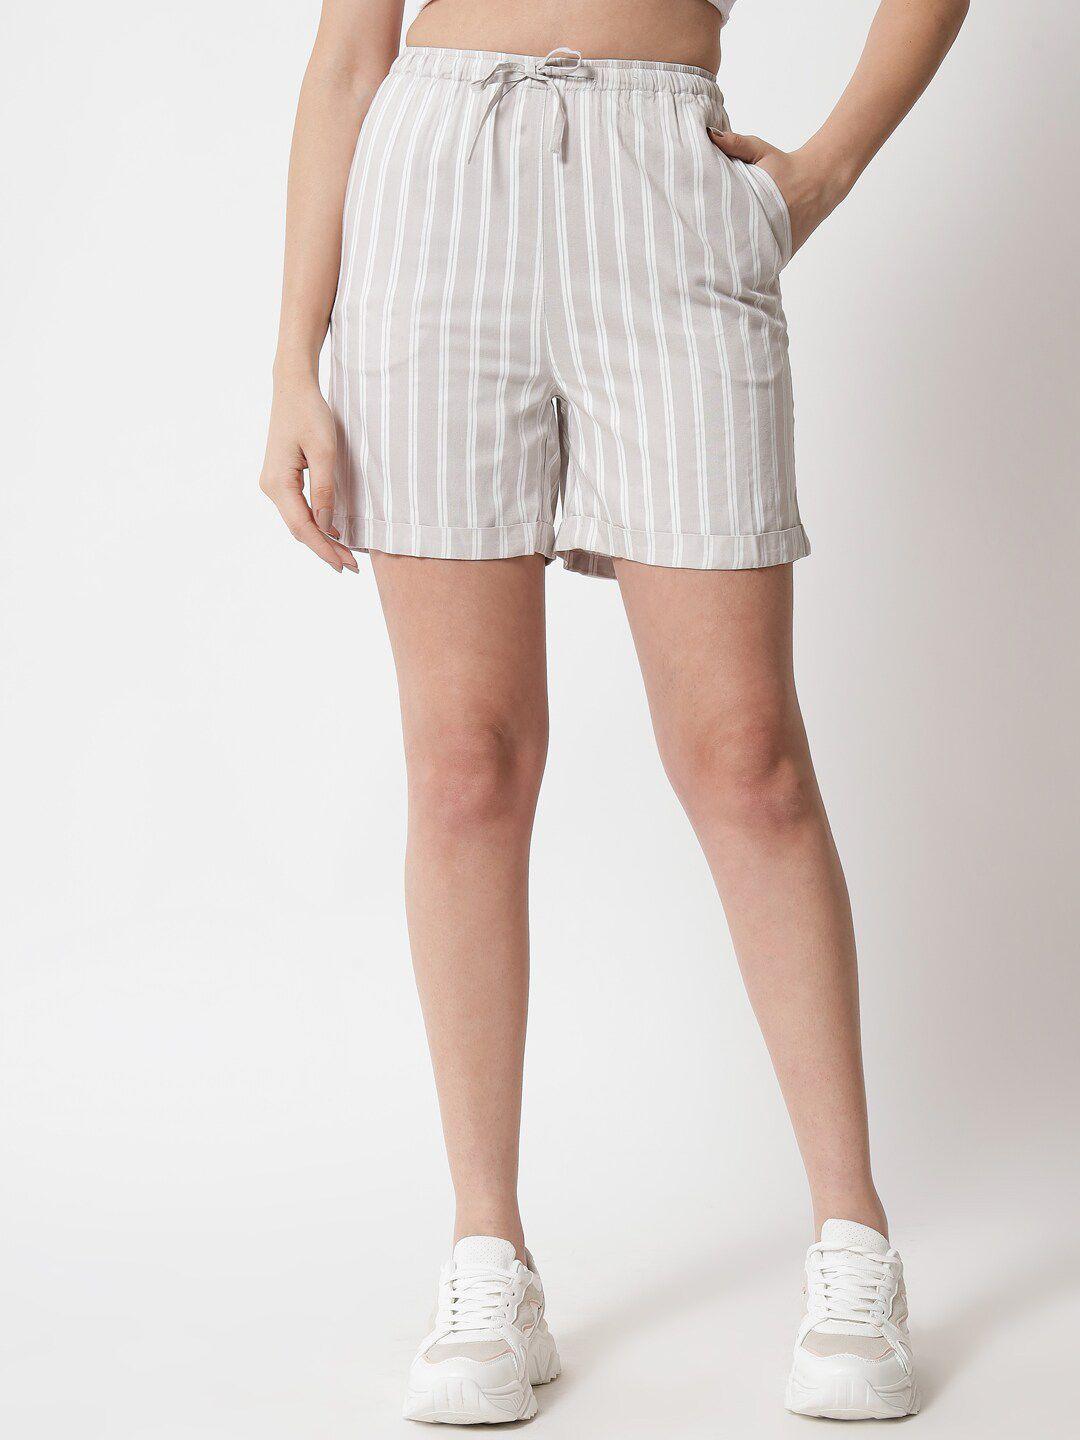 charmgal women grey striped outdoor shorts